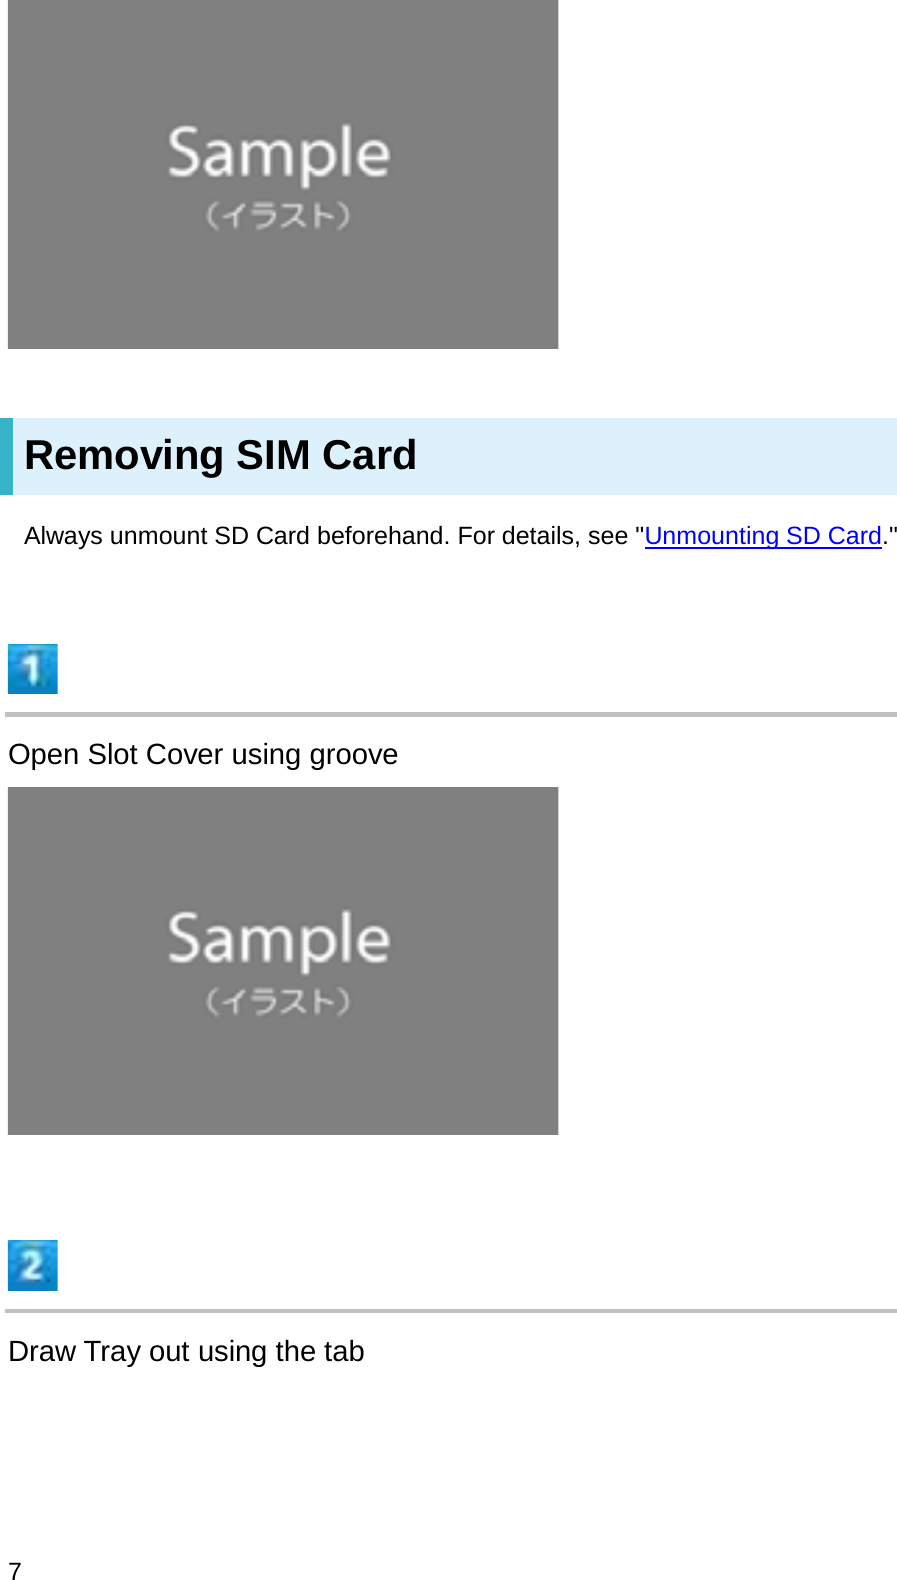 Removing SIM CardAlways unmount SD Card beforehand. For details, see &quot;Unmounting SD Card.&quot;Open Slot Cover using grooveDraw Tray out using the tab7